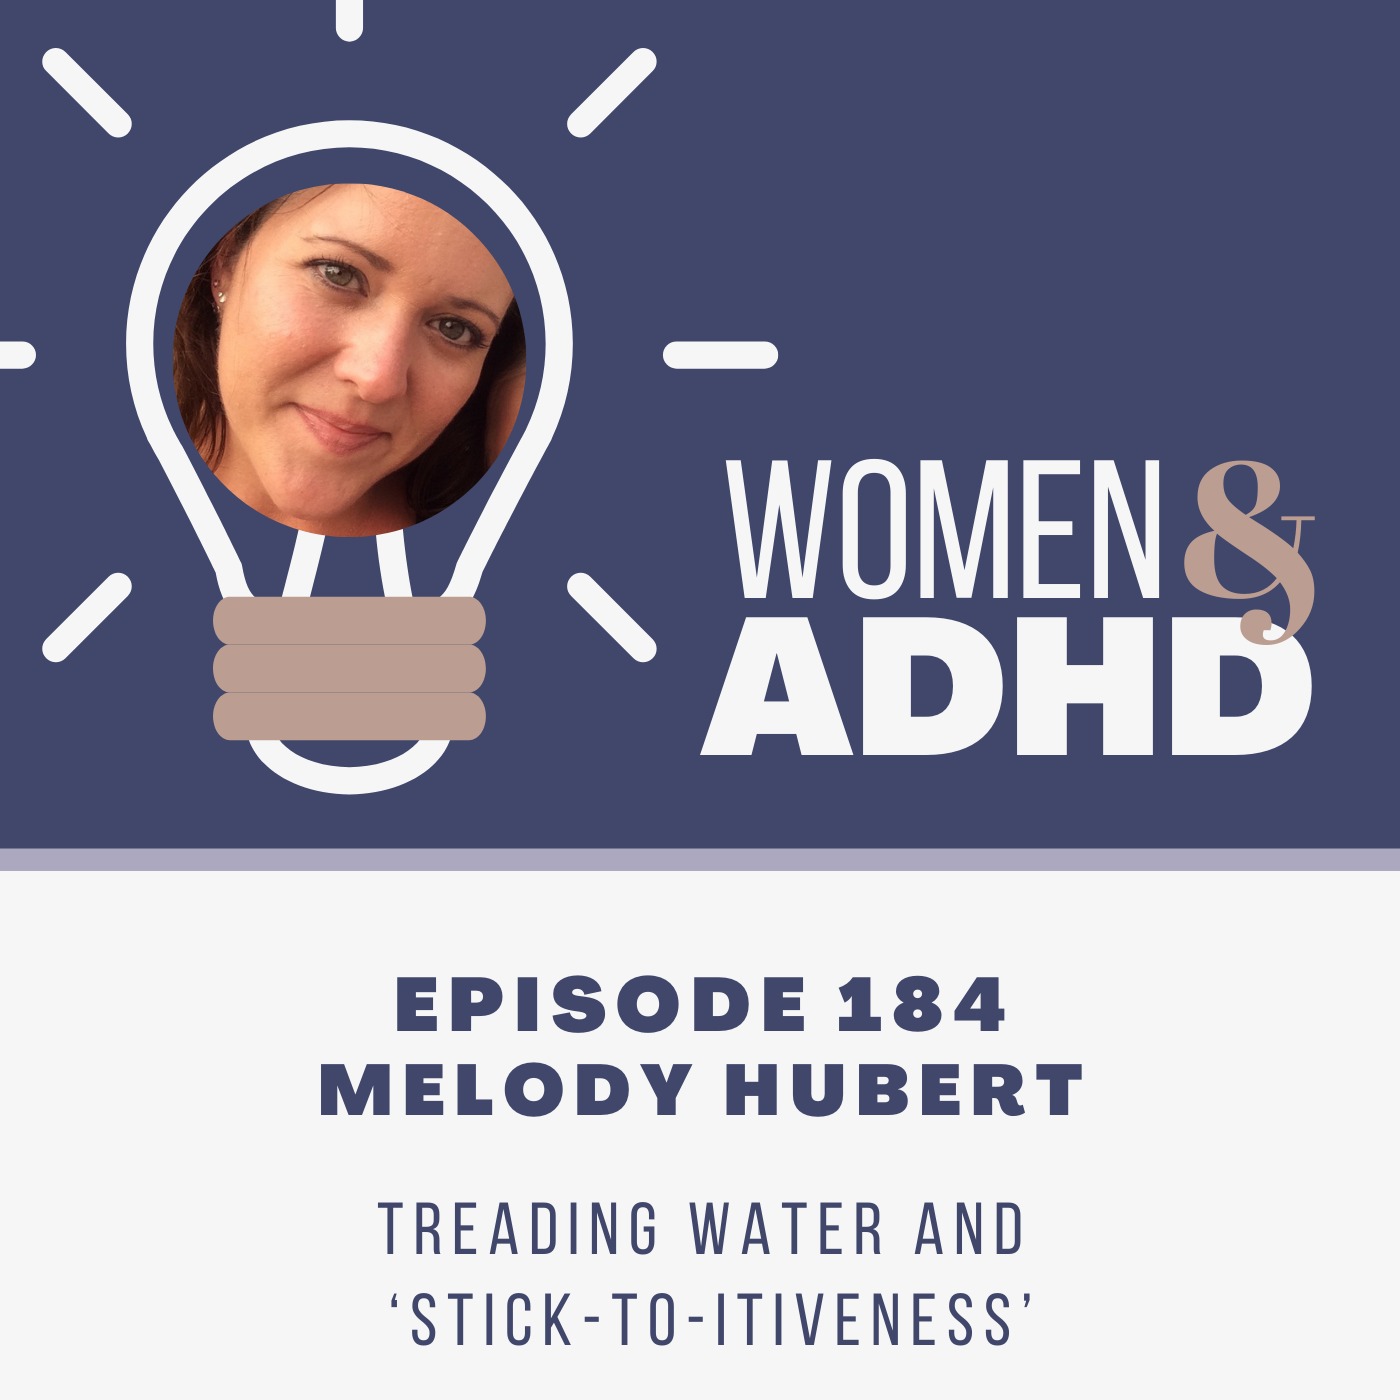 Melody Hubert: Treading water and ‘stick-to-itiveness’